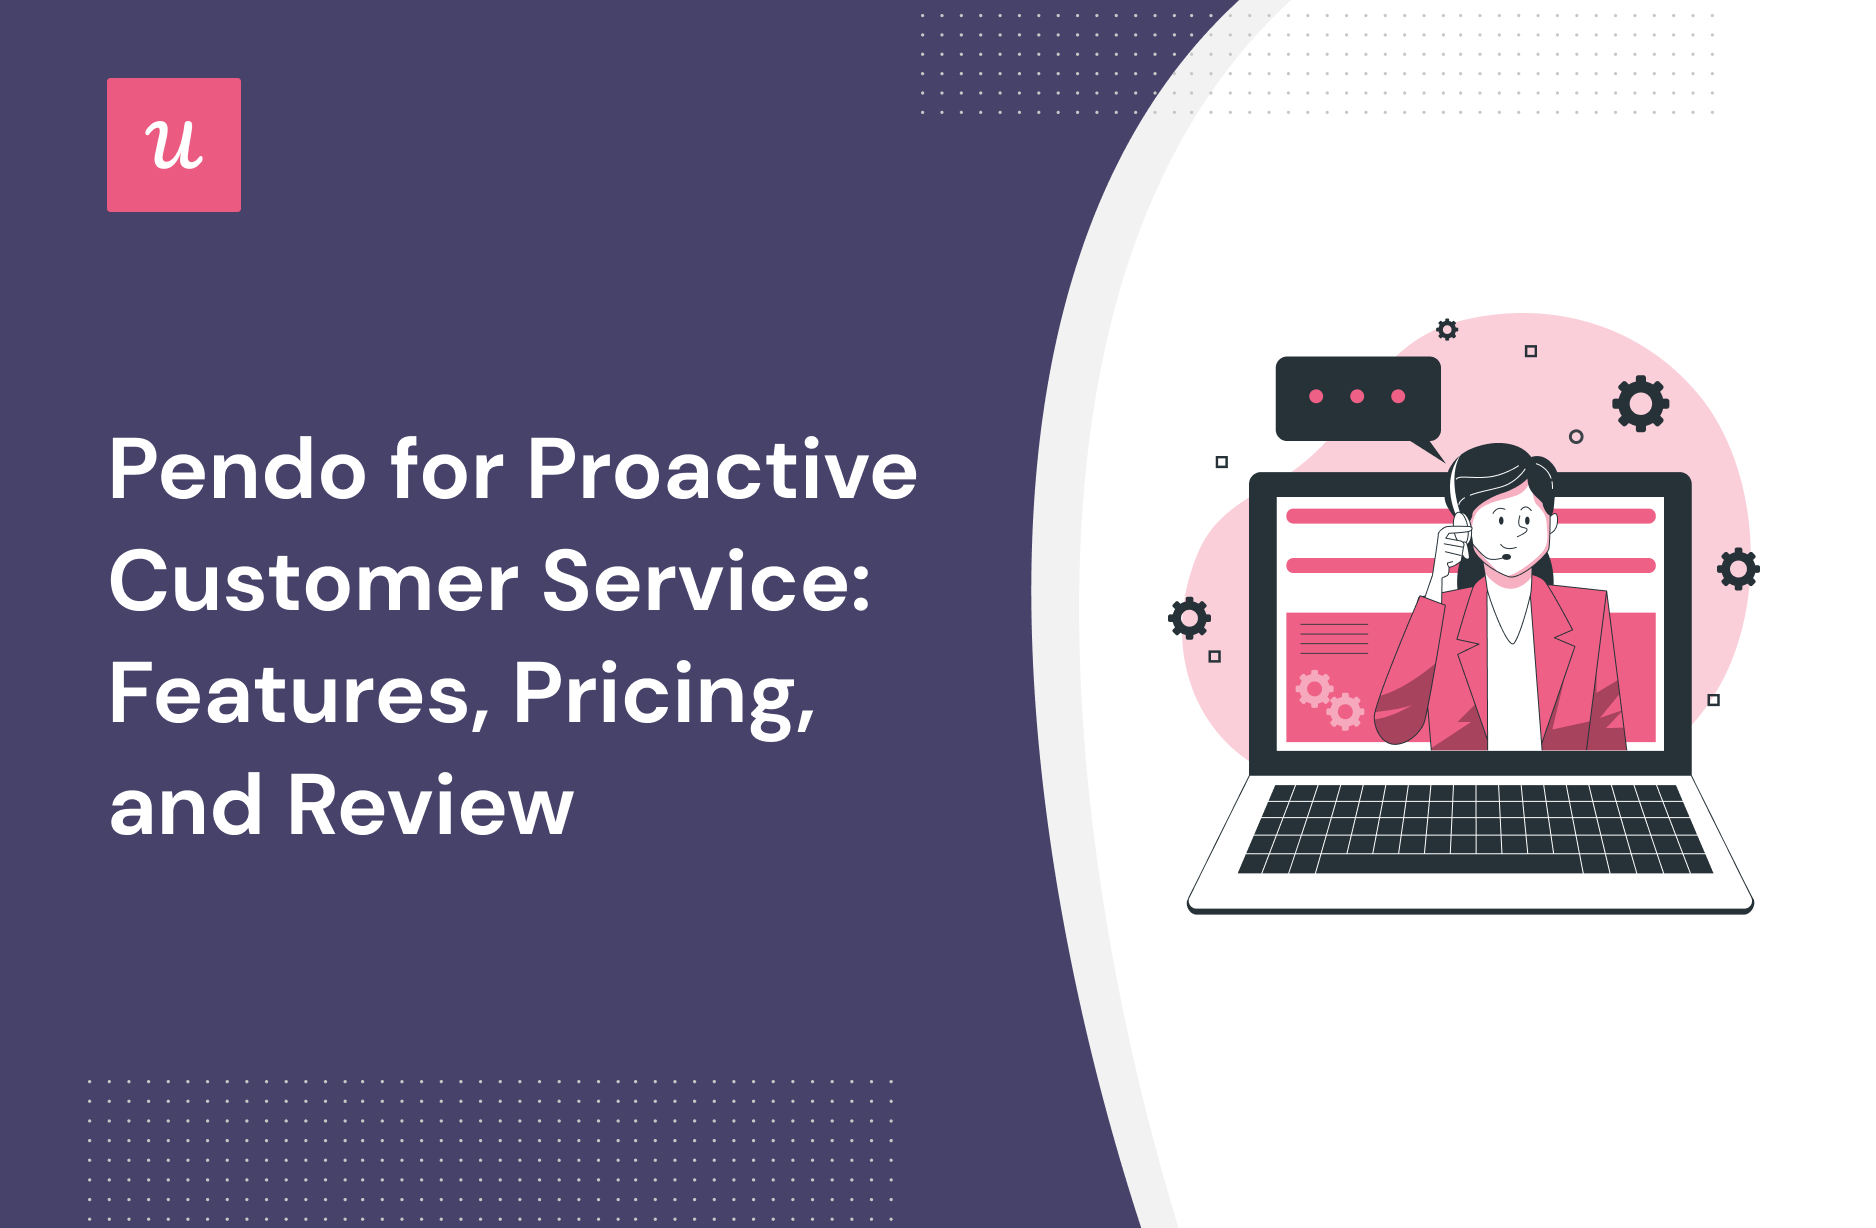 Pendo for Proactive Customer Service: Features, Pricing, and Review